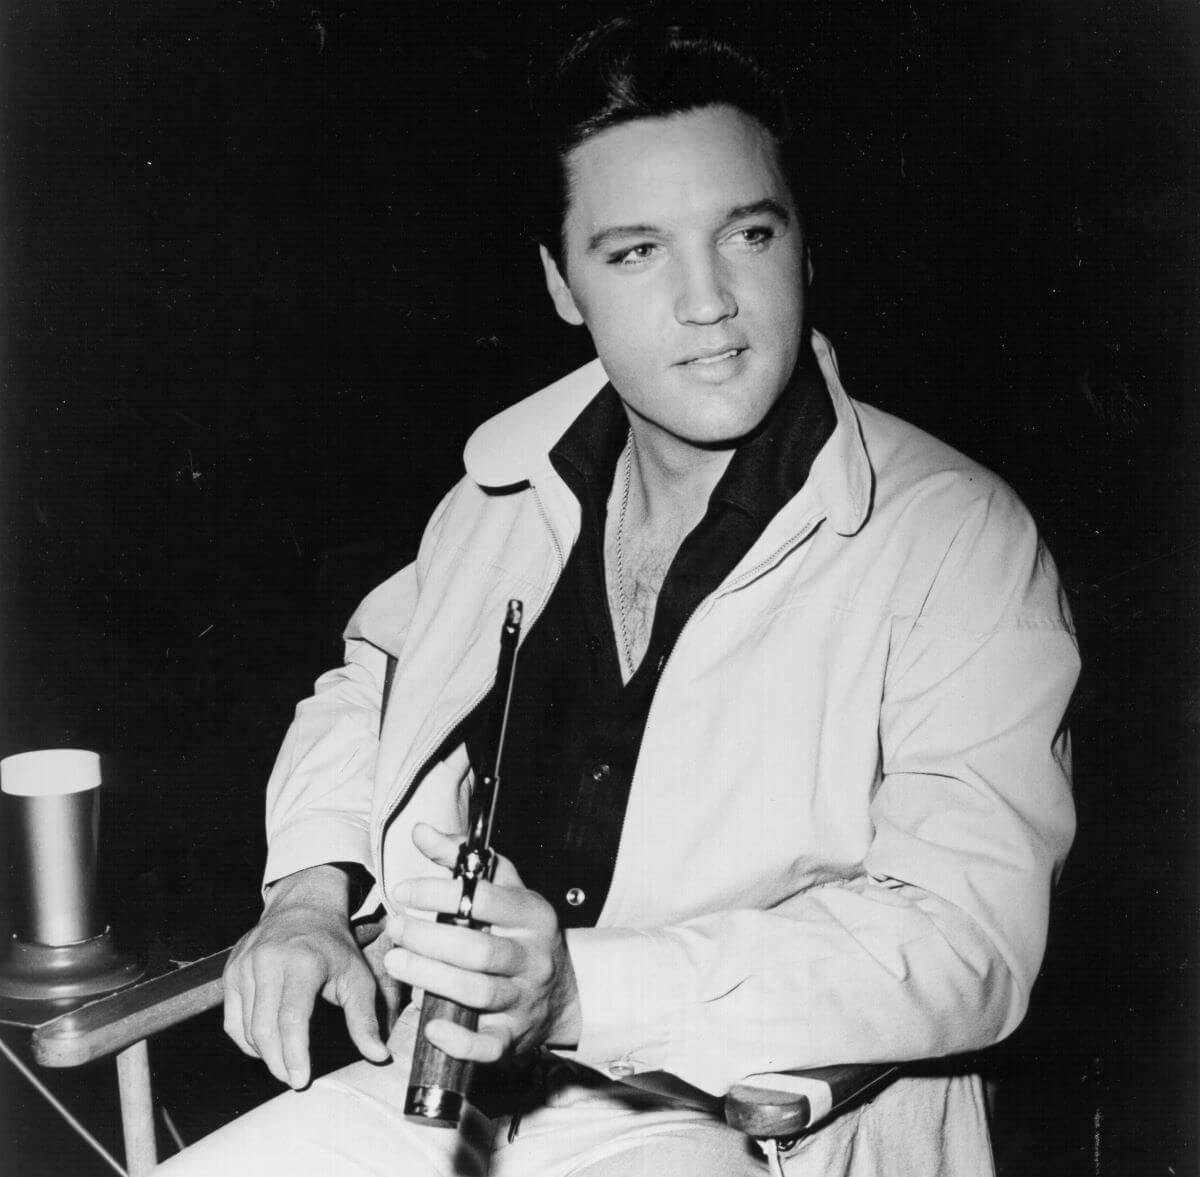 A black and white picture of Elvis Presley sitting and holding a gun in one hand.